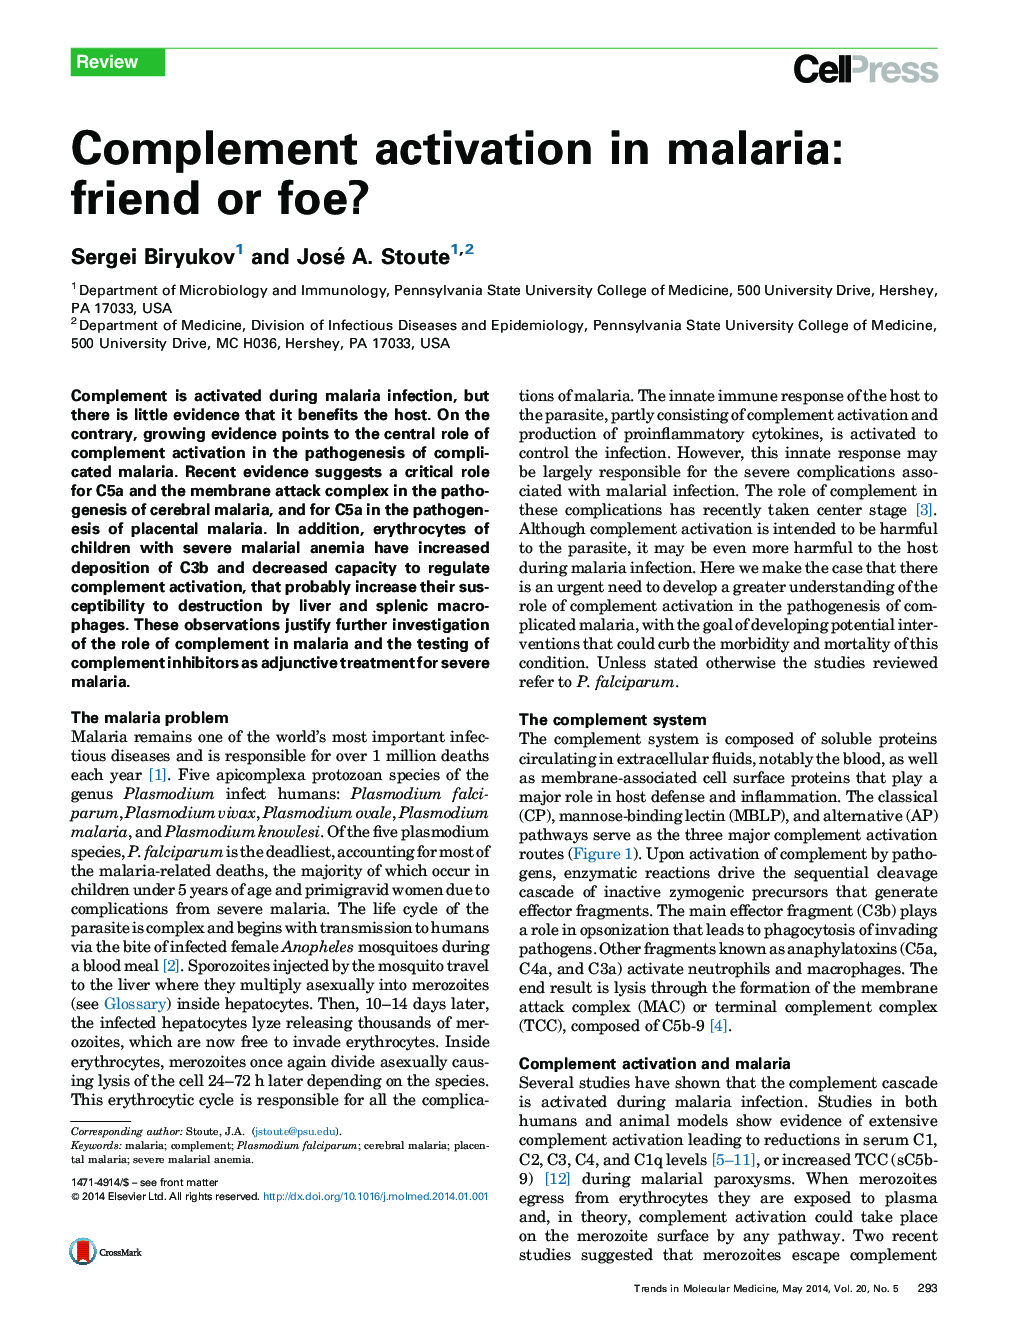 Complement activation in malaria: friend or foe?